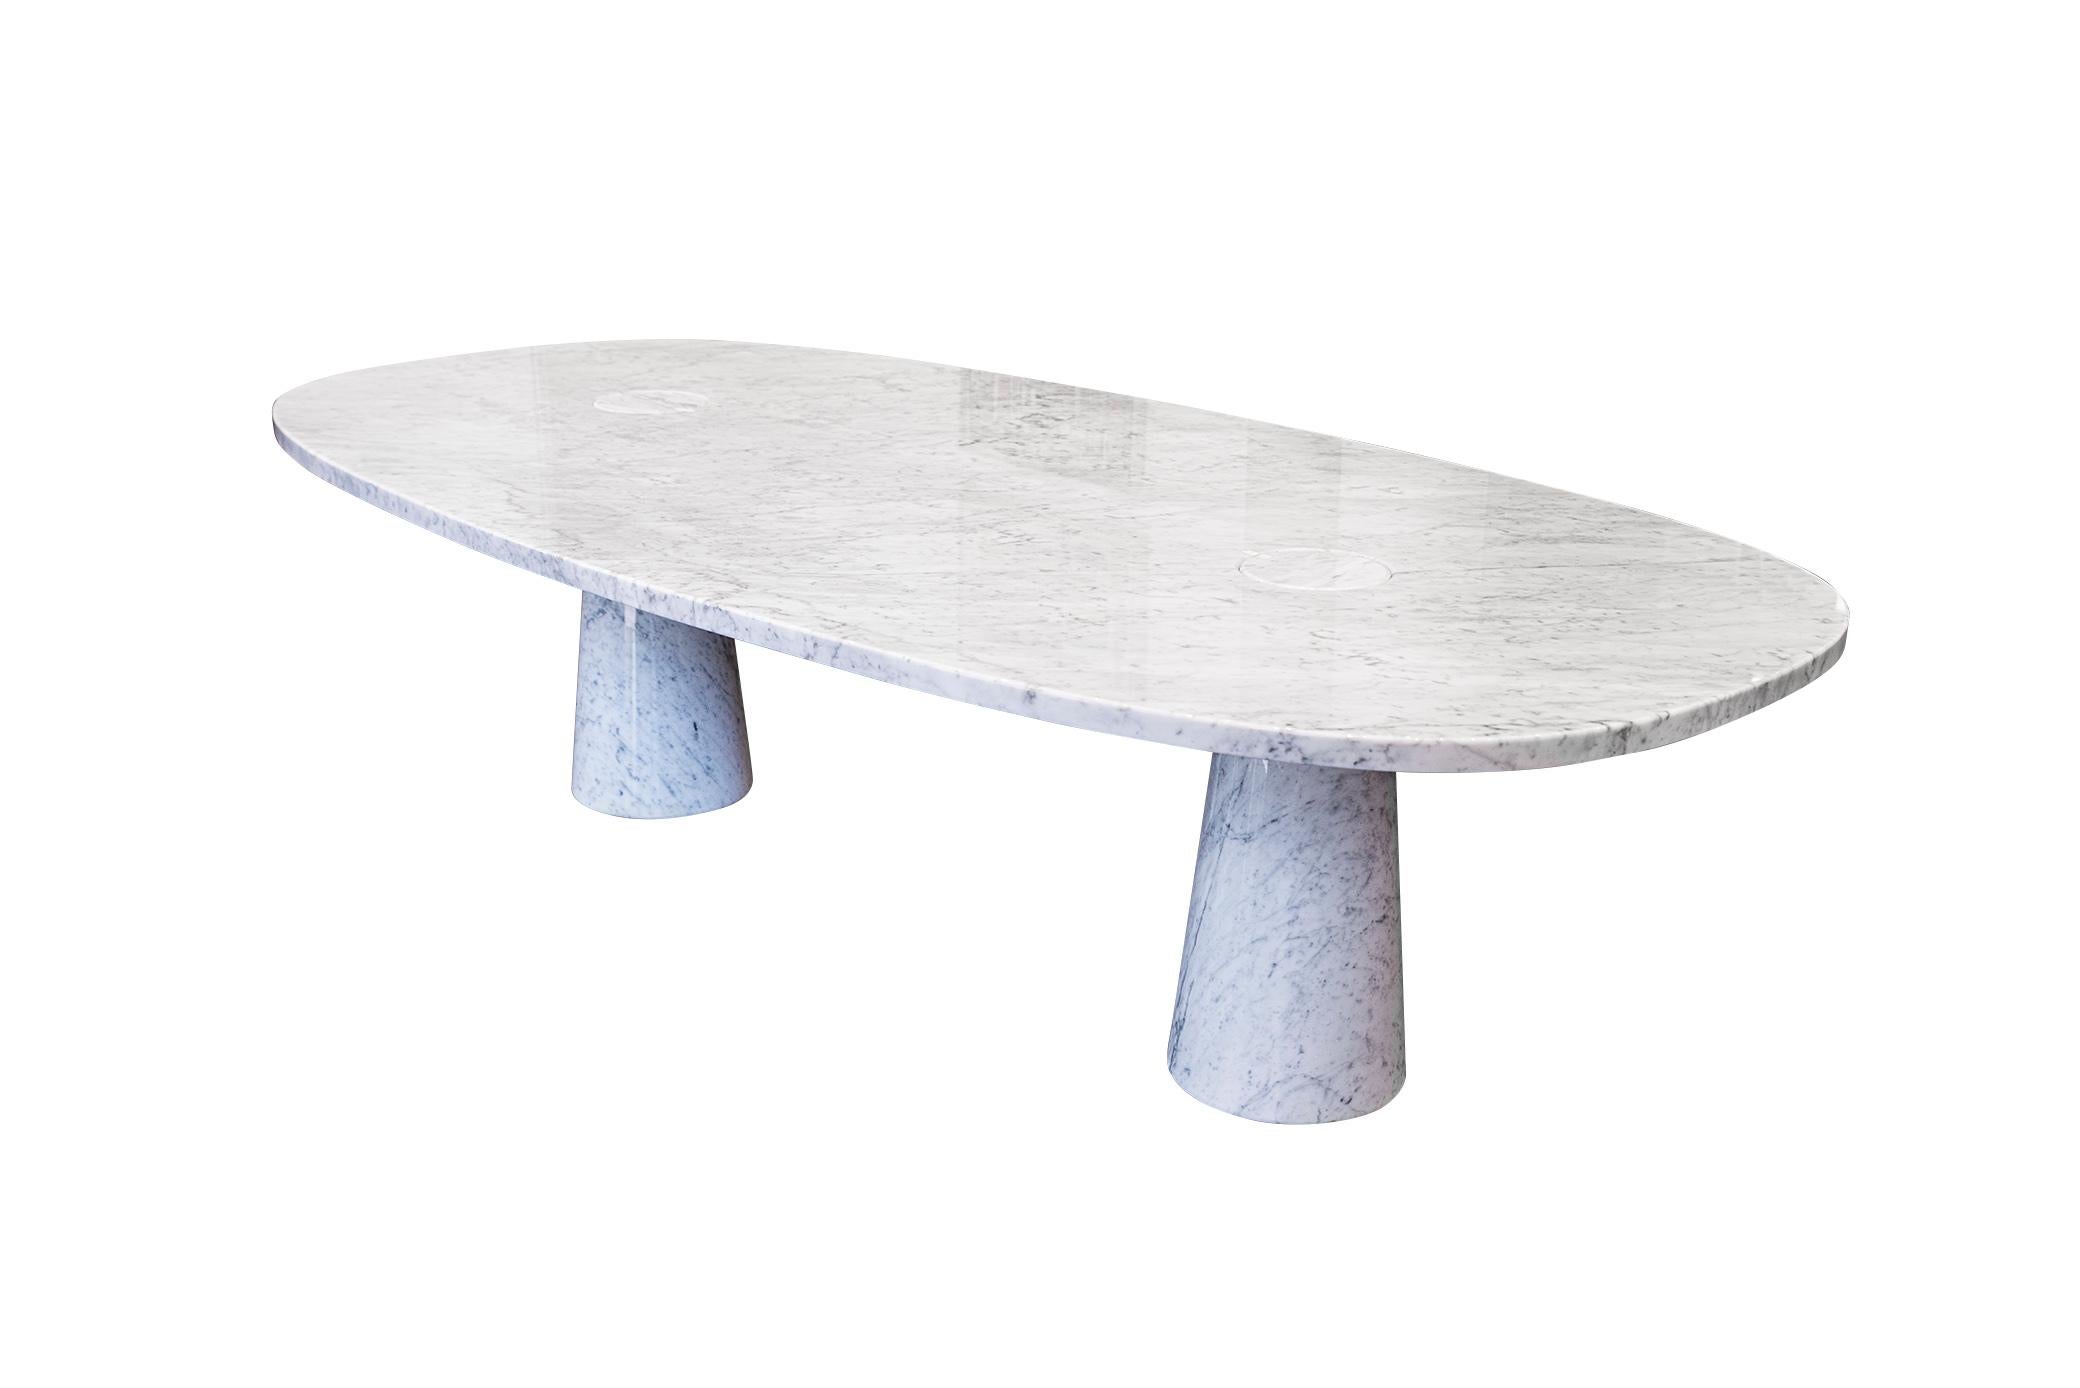 Angelo Mangiarotti, 
Dining room table, 
Model Eros,
Skipper, 
Carrara marble,
Italy, circa 1970.

Measures: Width 280 cm, depth 140 cm, height 73 cm.

Angelo Mangiarotti (1921-2012) is an Italian architect and industrial designer who was